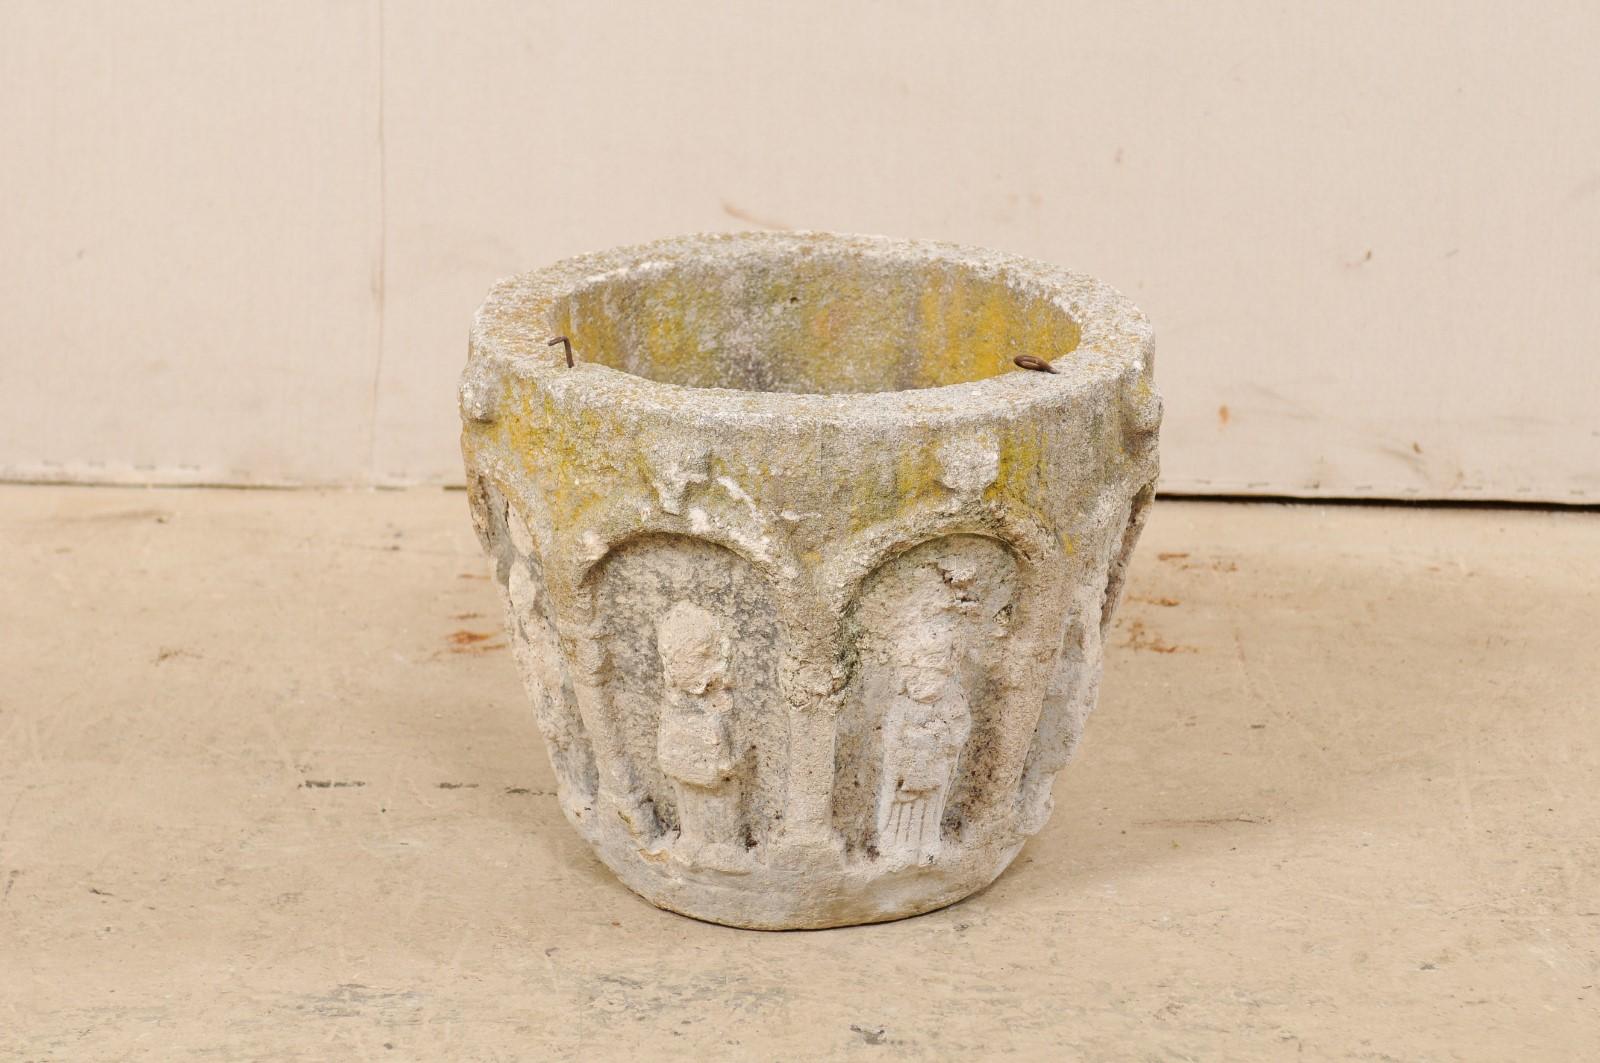 A Spanish cast-stone planter from the early 20th century. This antique planter from Spain was created from cast-stone and artfully decorated about the exterior with various archways and figures within. The round-shaped planter tapers gently and